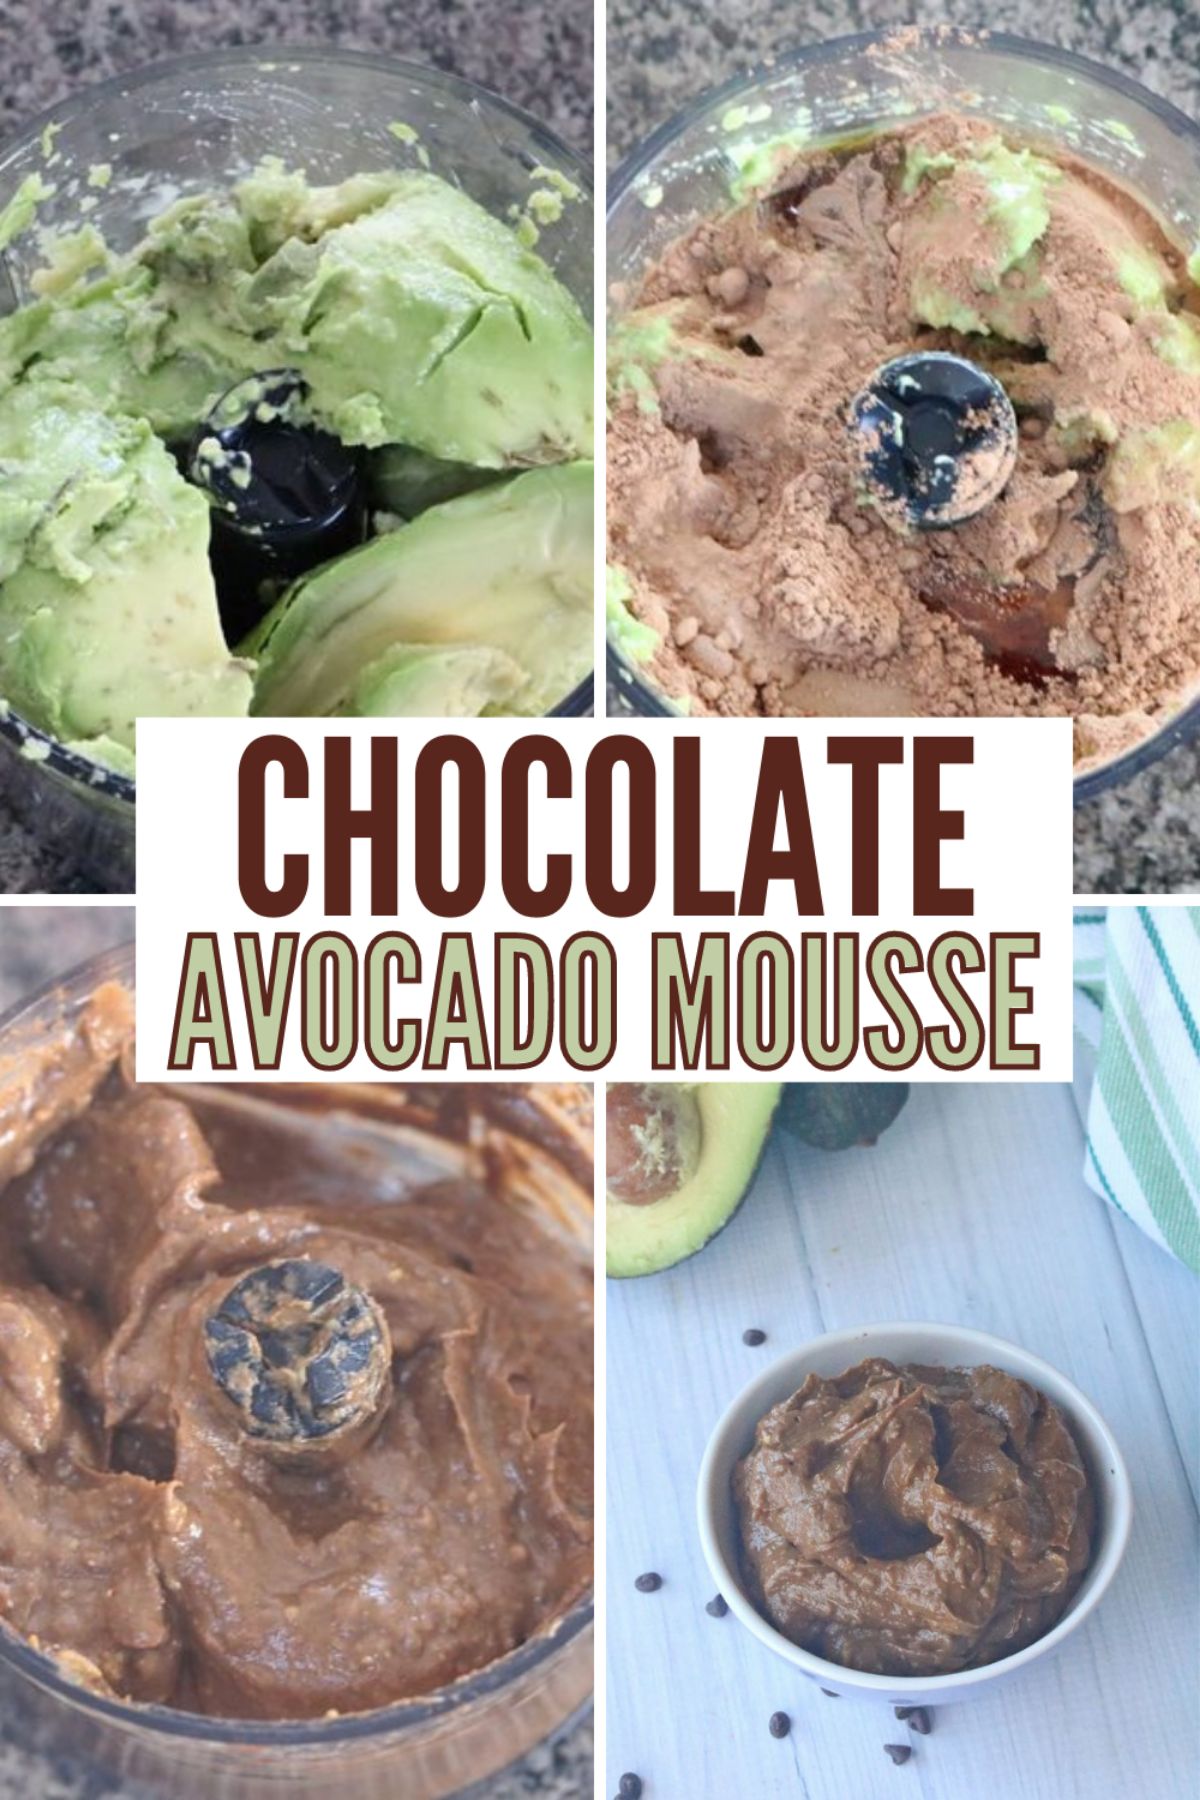 Chocolate Avocado Mousse is so easy to prepare and is full of rich, creamy flavor. It's a delicious swap for your candy bar cravings. #chocolateavocadomousse #chocolate #avocado #mousse #recipe via @wondermomwannab